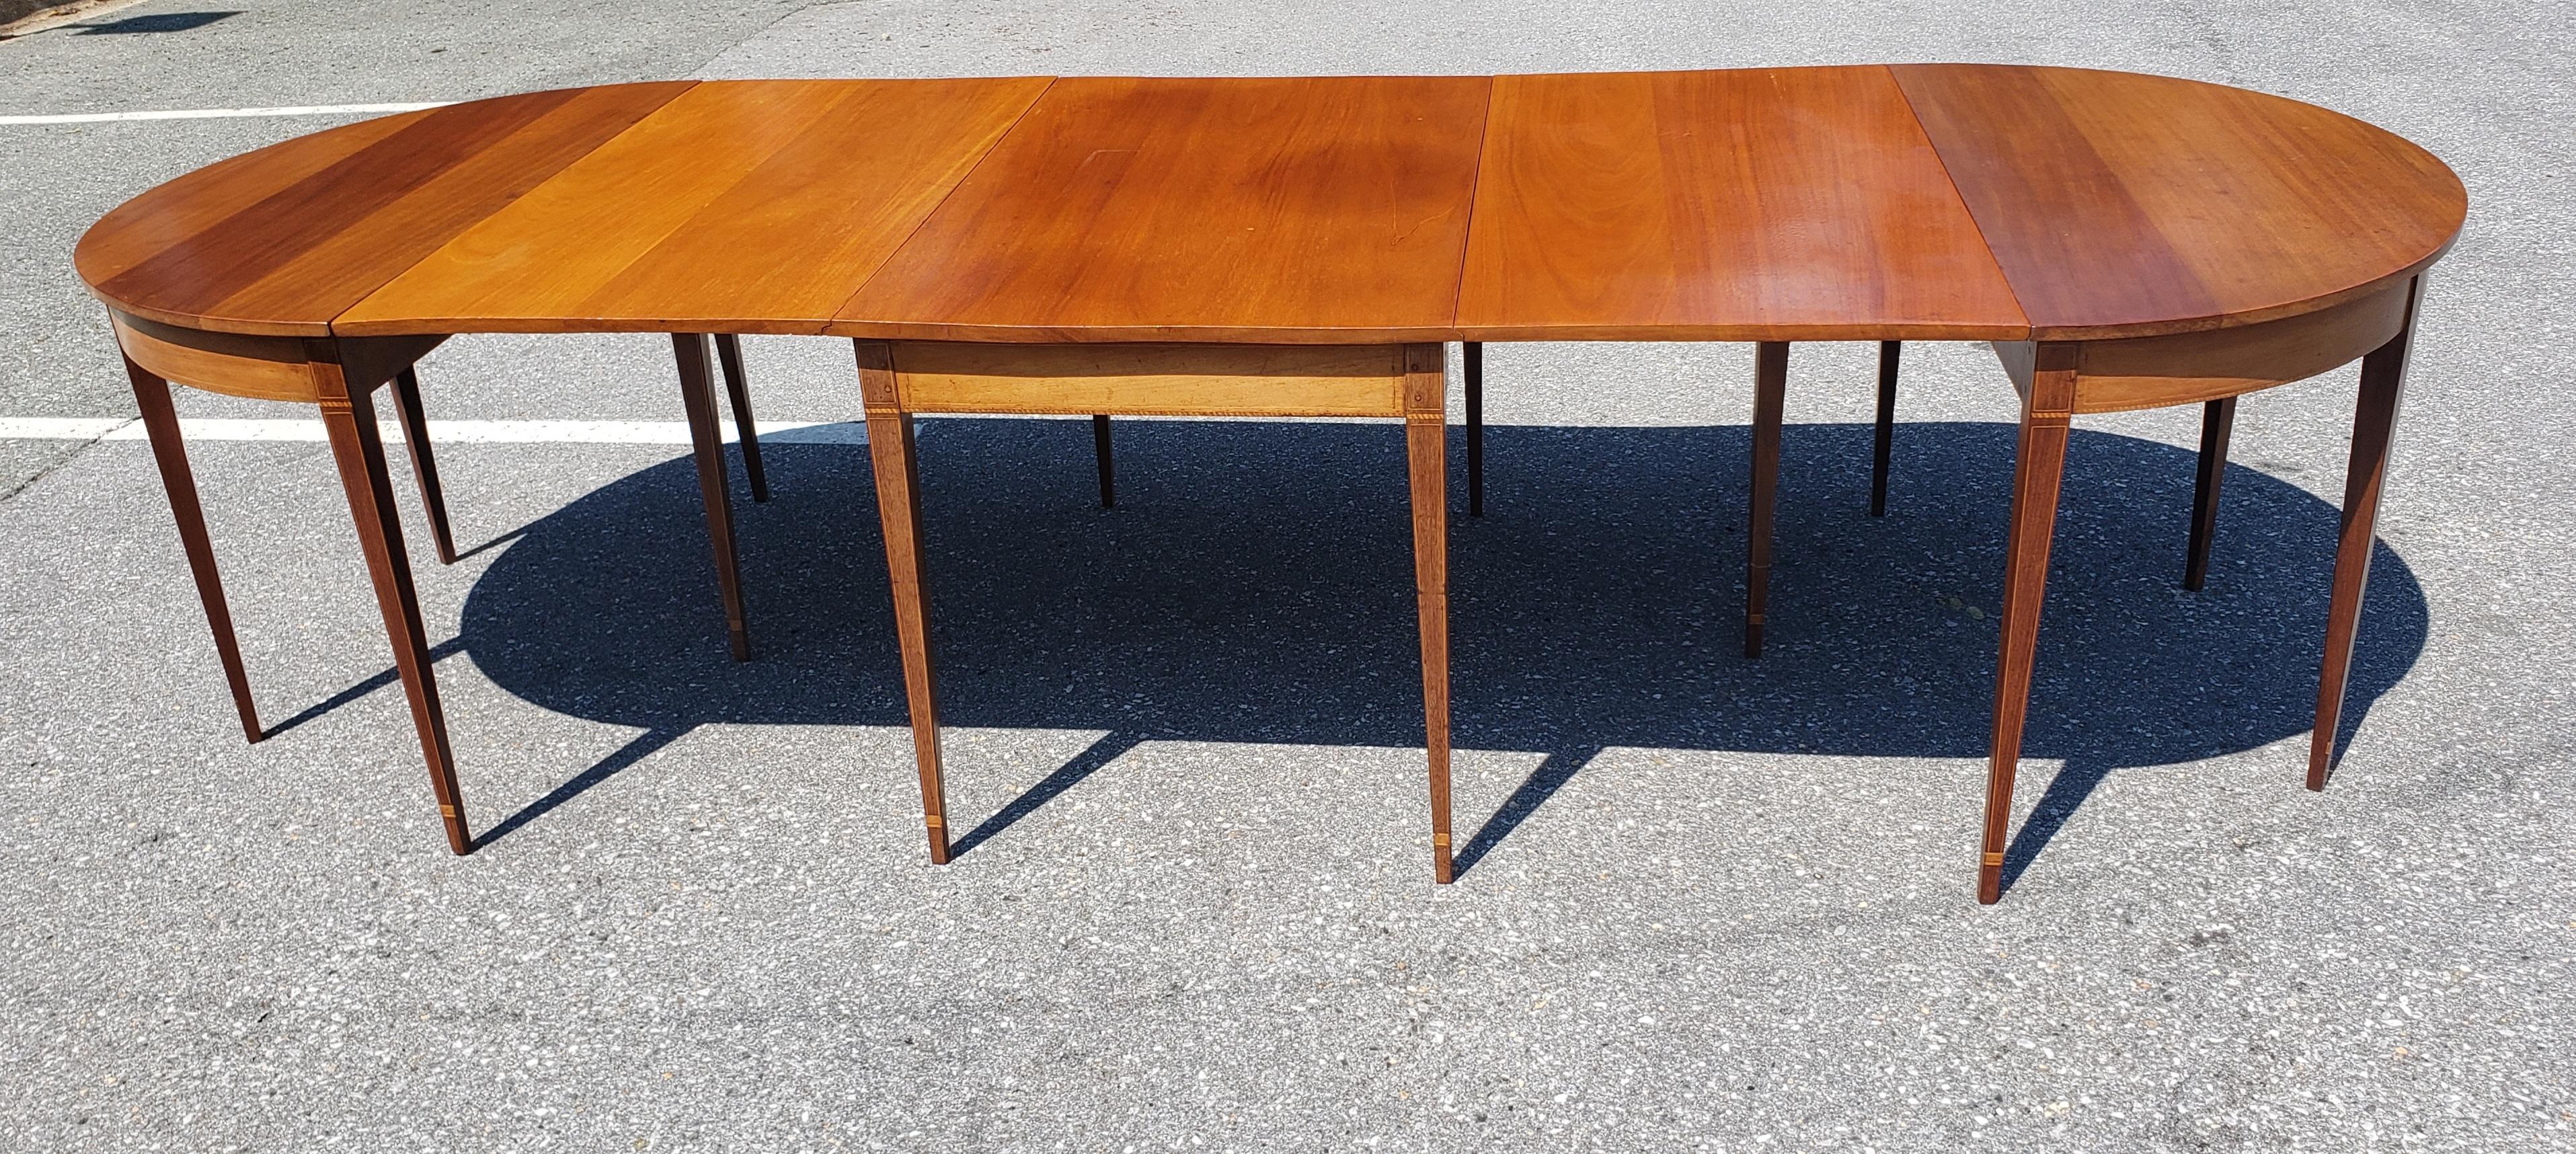 1930s American Federal Inlaid Mahogany 3-Part Banquet Table For Sale 12